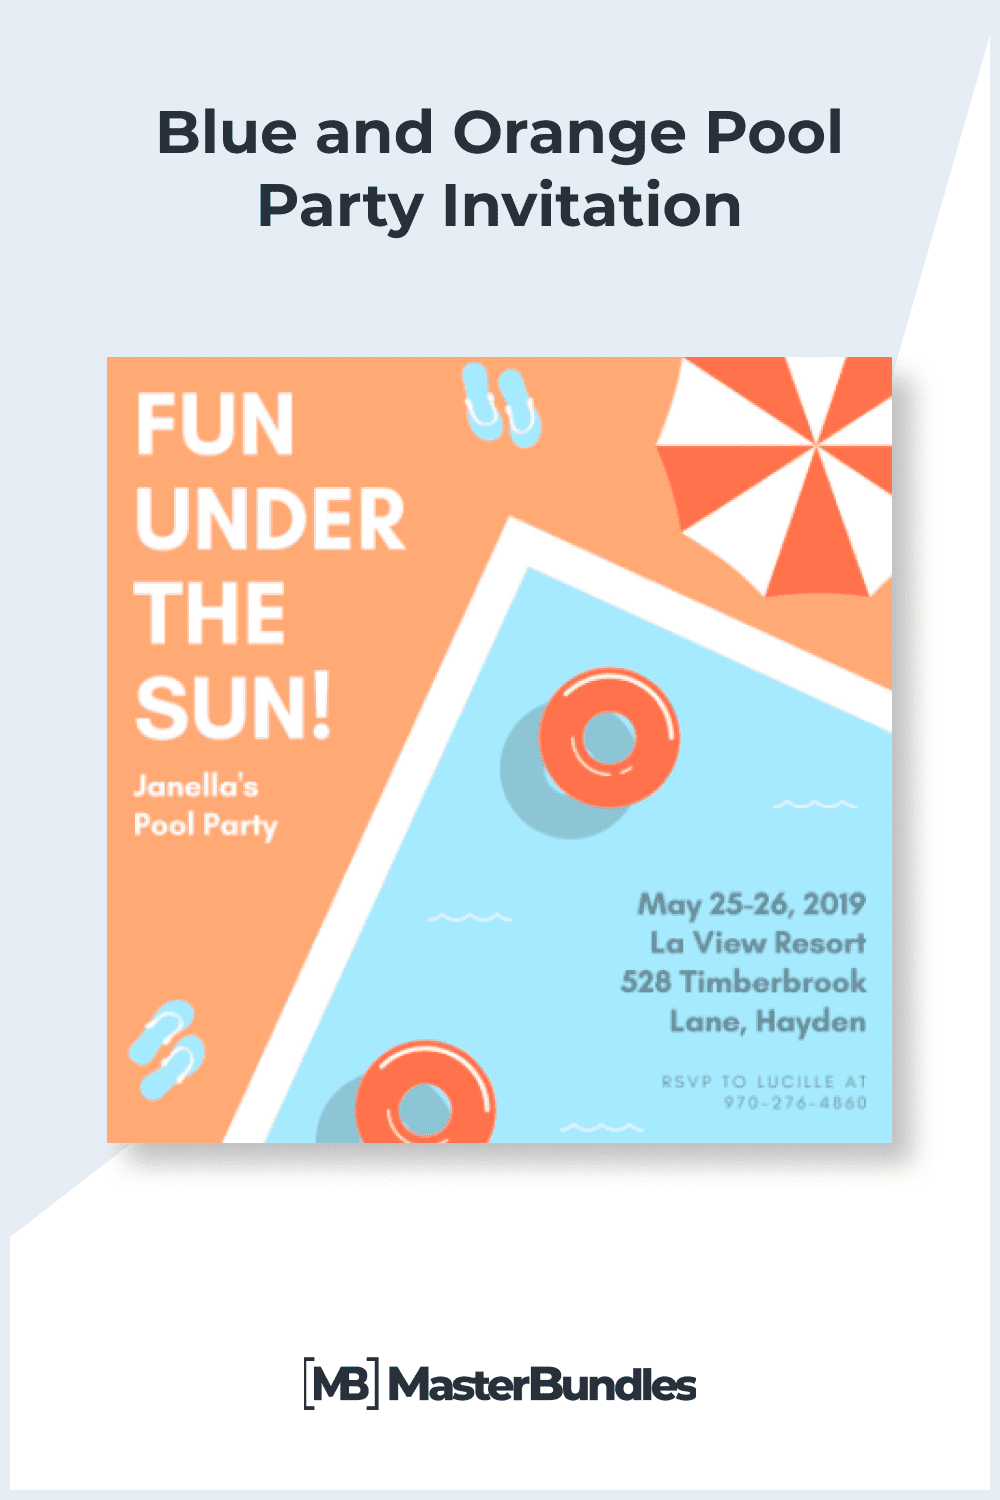 Concise invitations to a pool party.